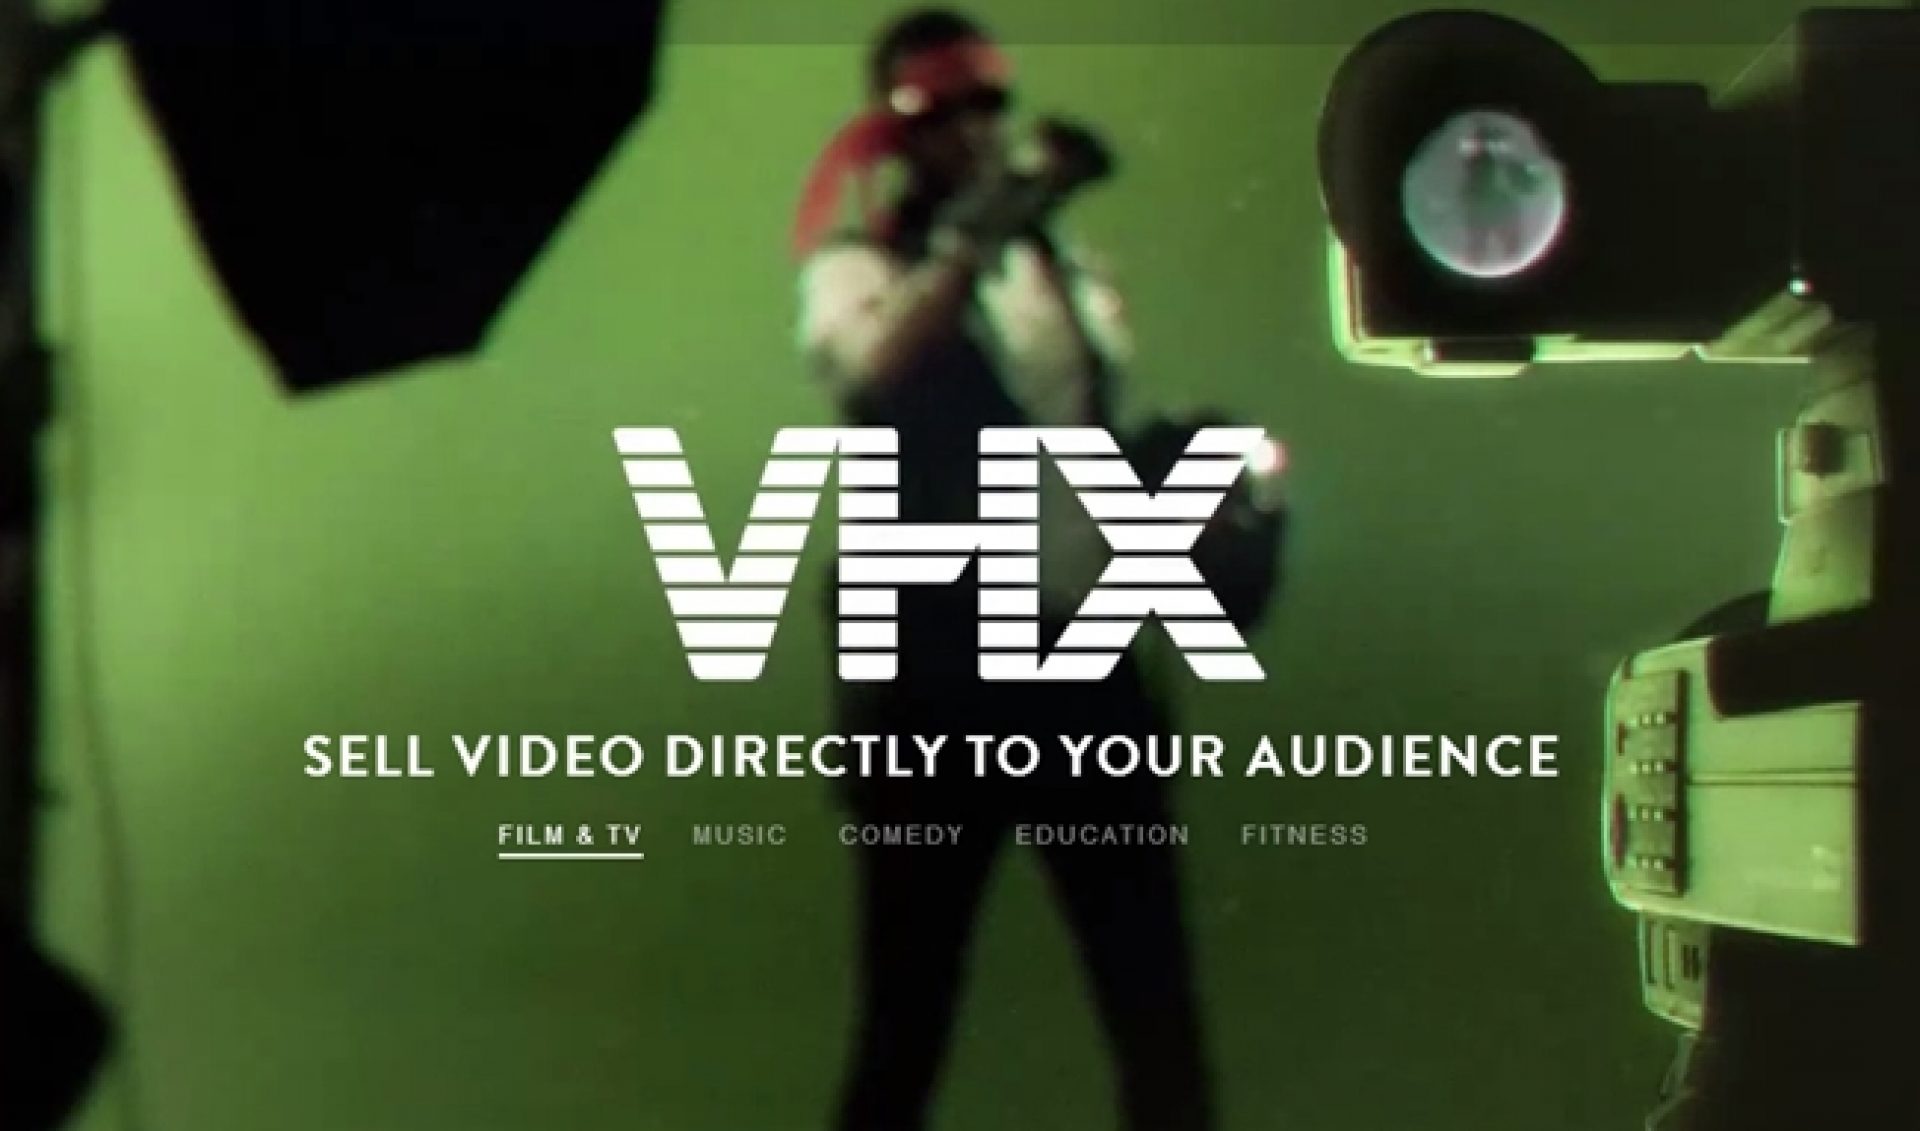 VHX Brings Self-Distribution To The Online Video Masses